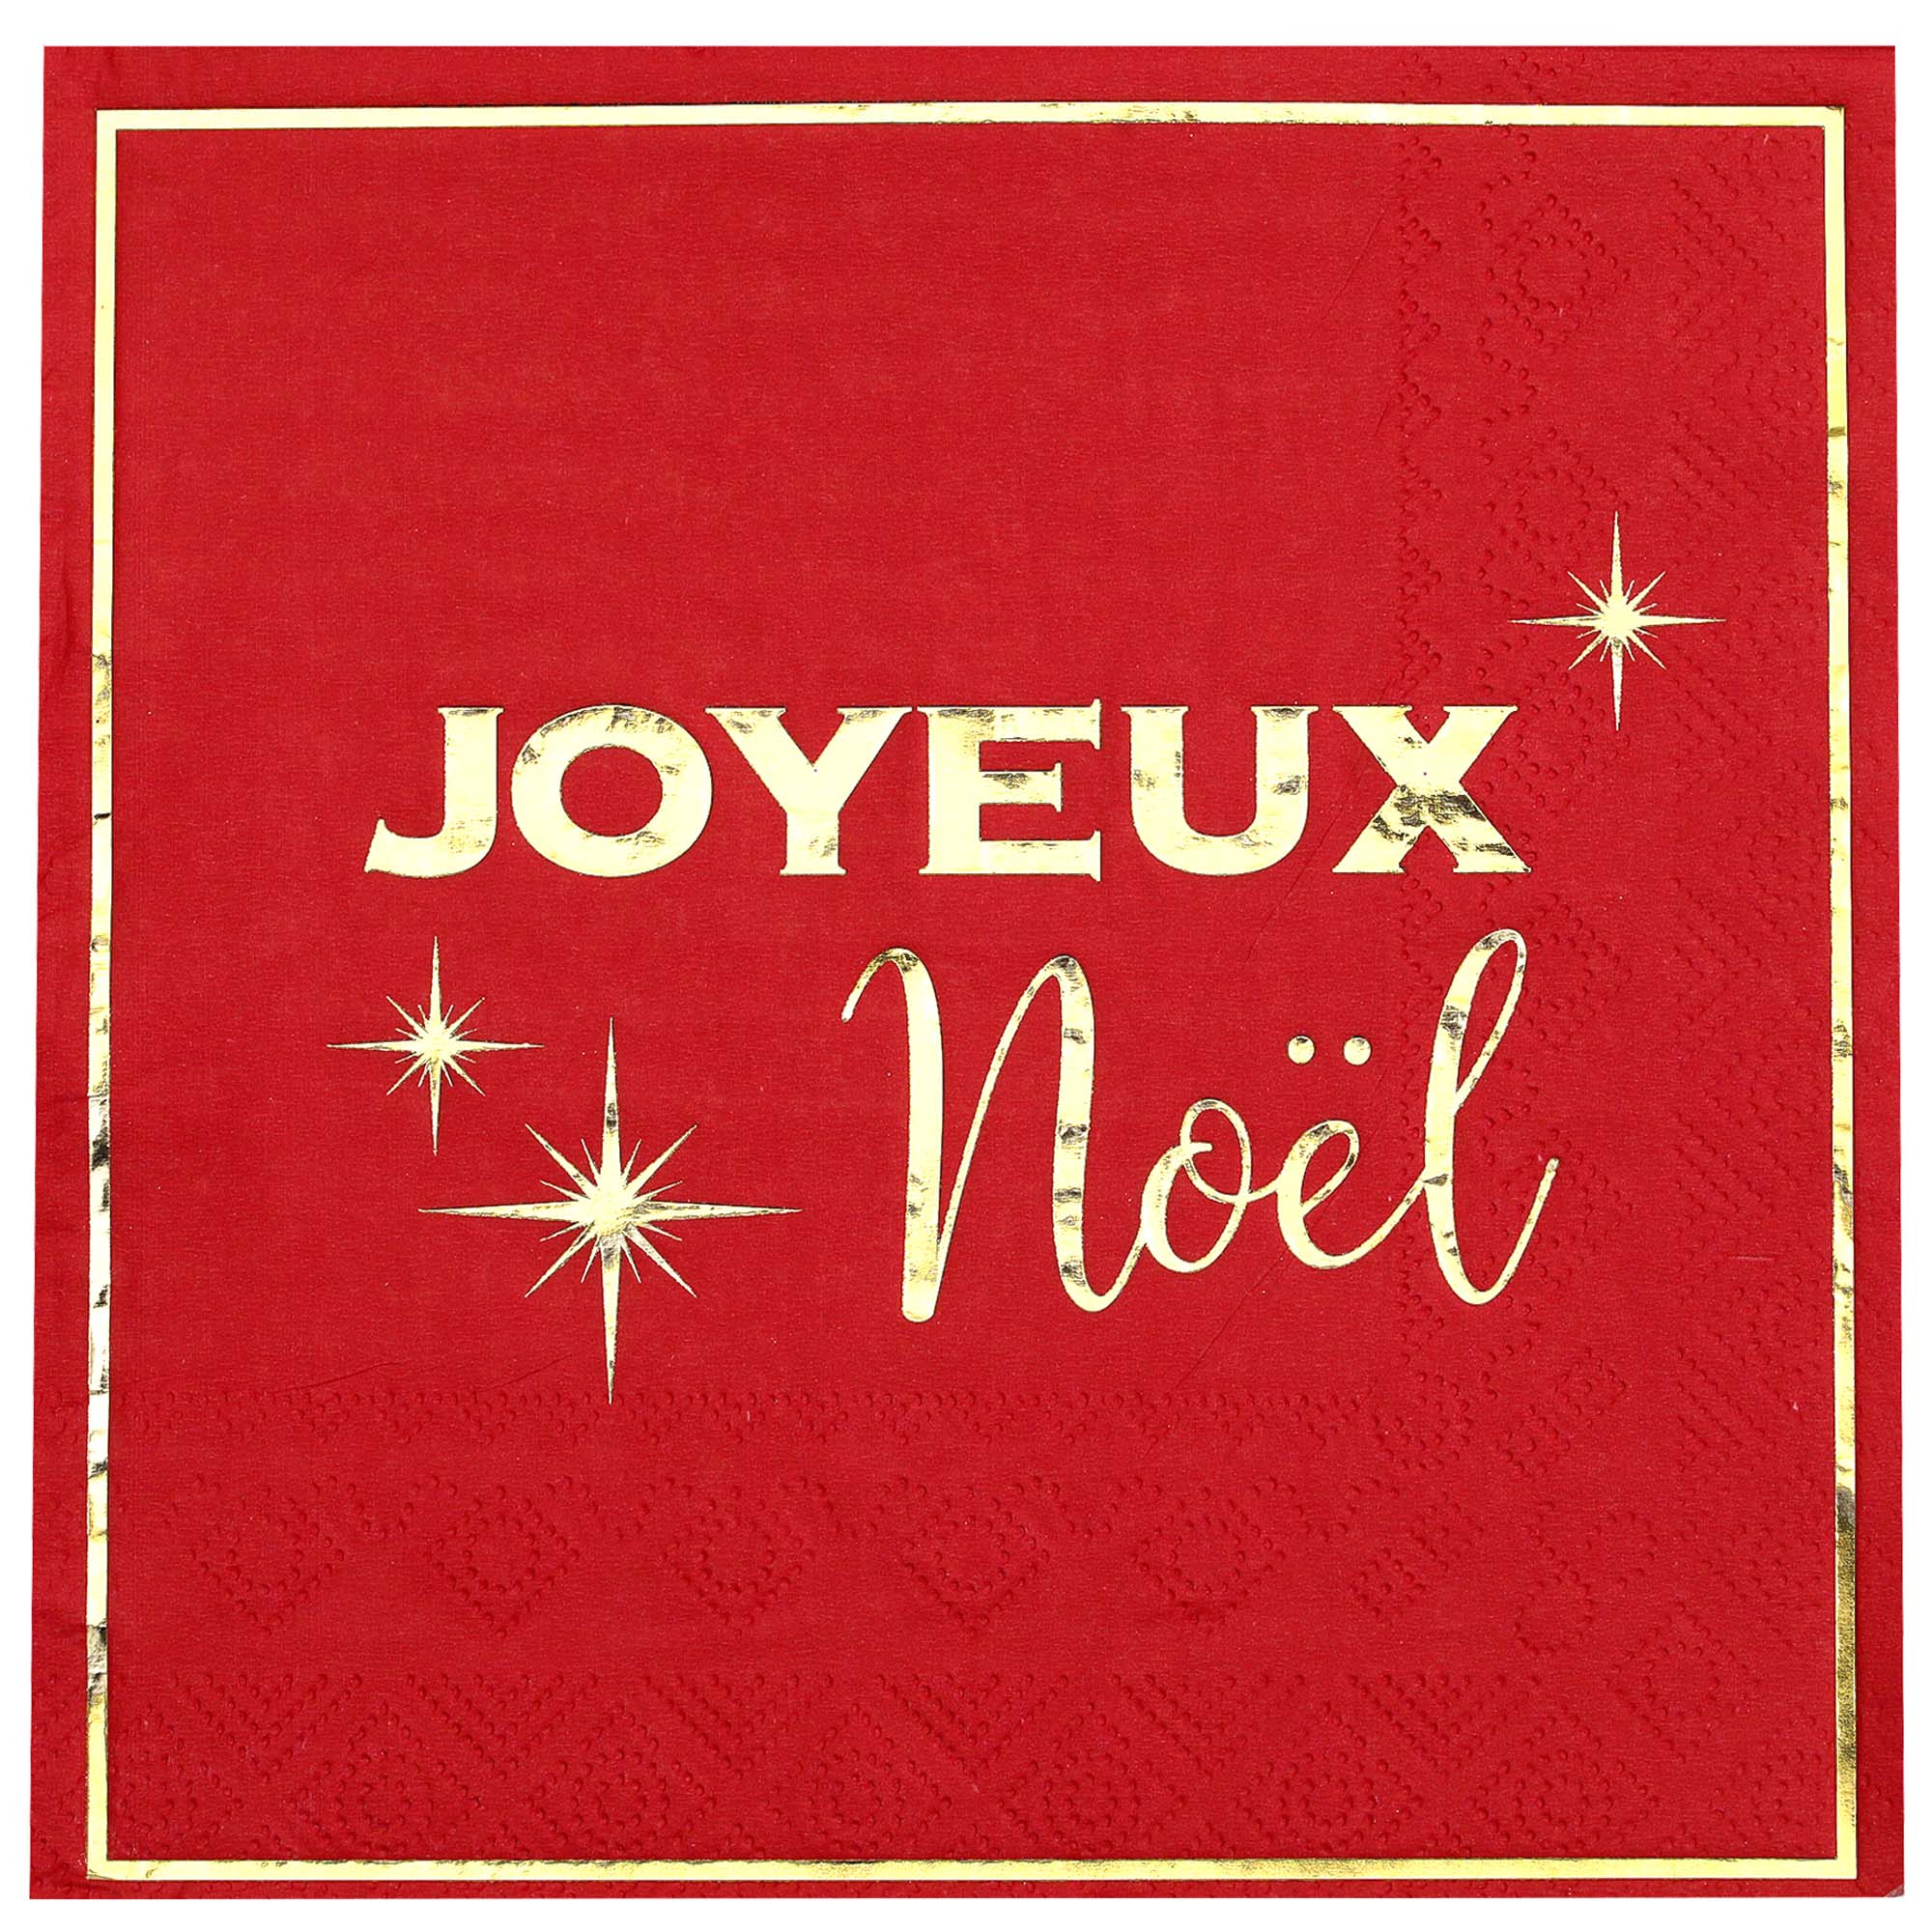 No?l Chic Large Lunch Napkins, Red and Gold, 10 Count